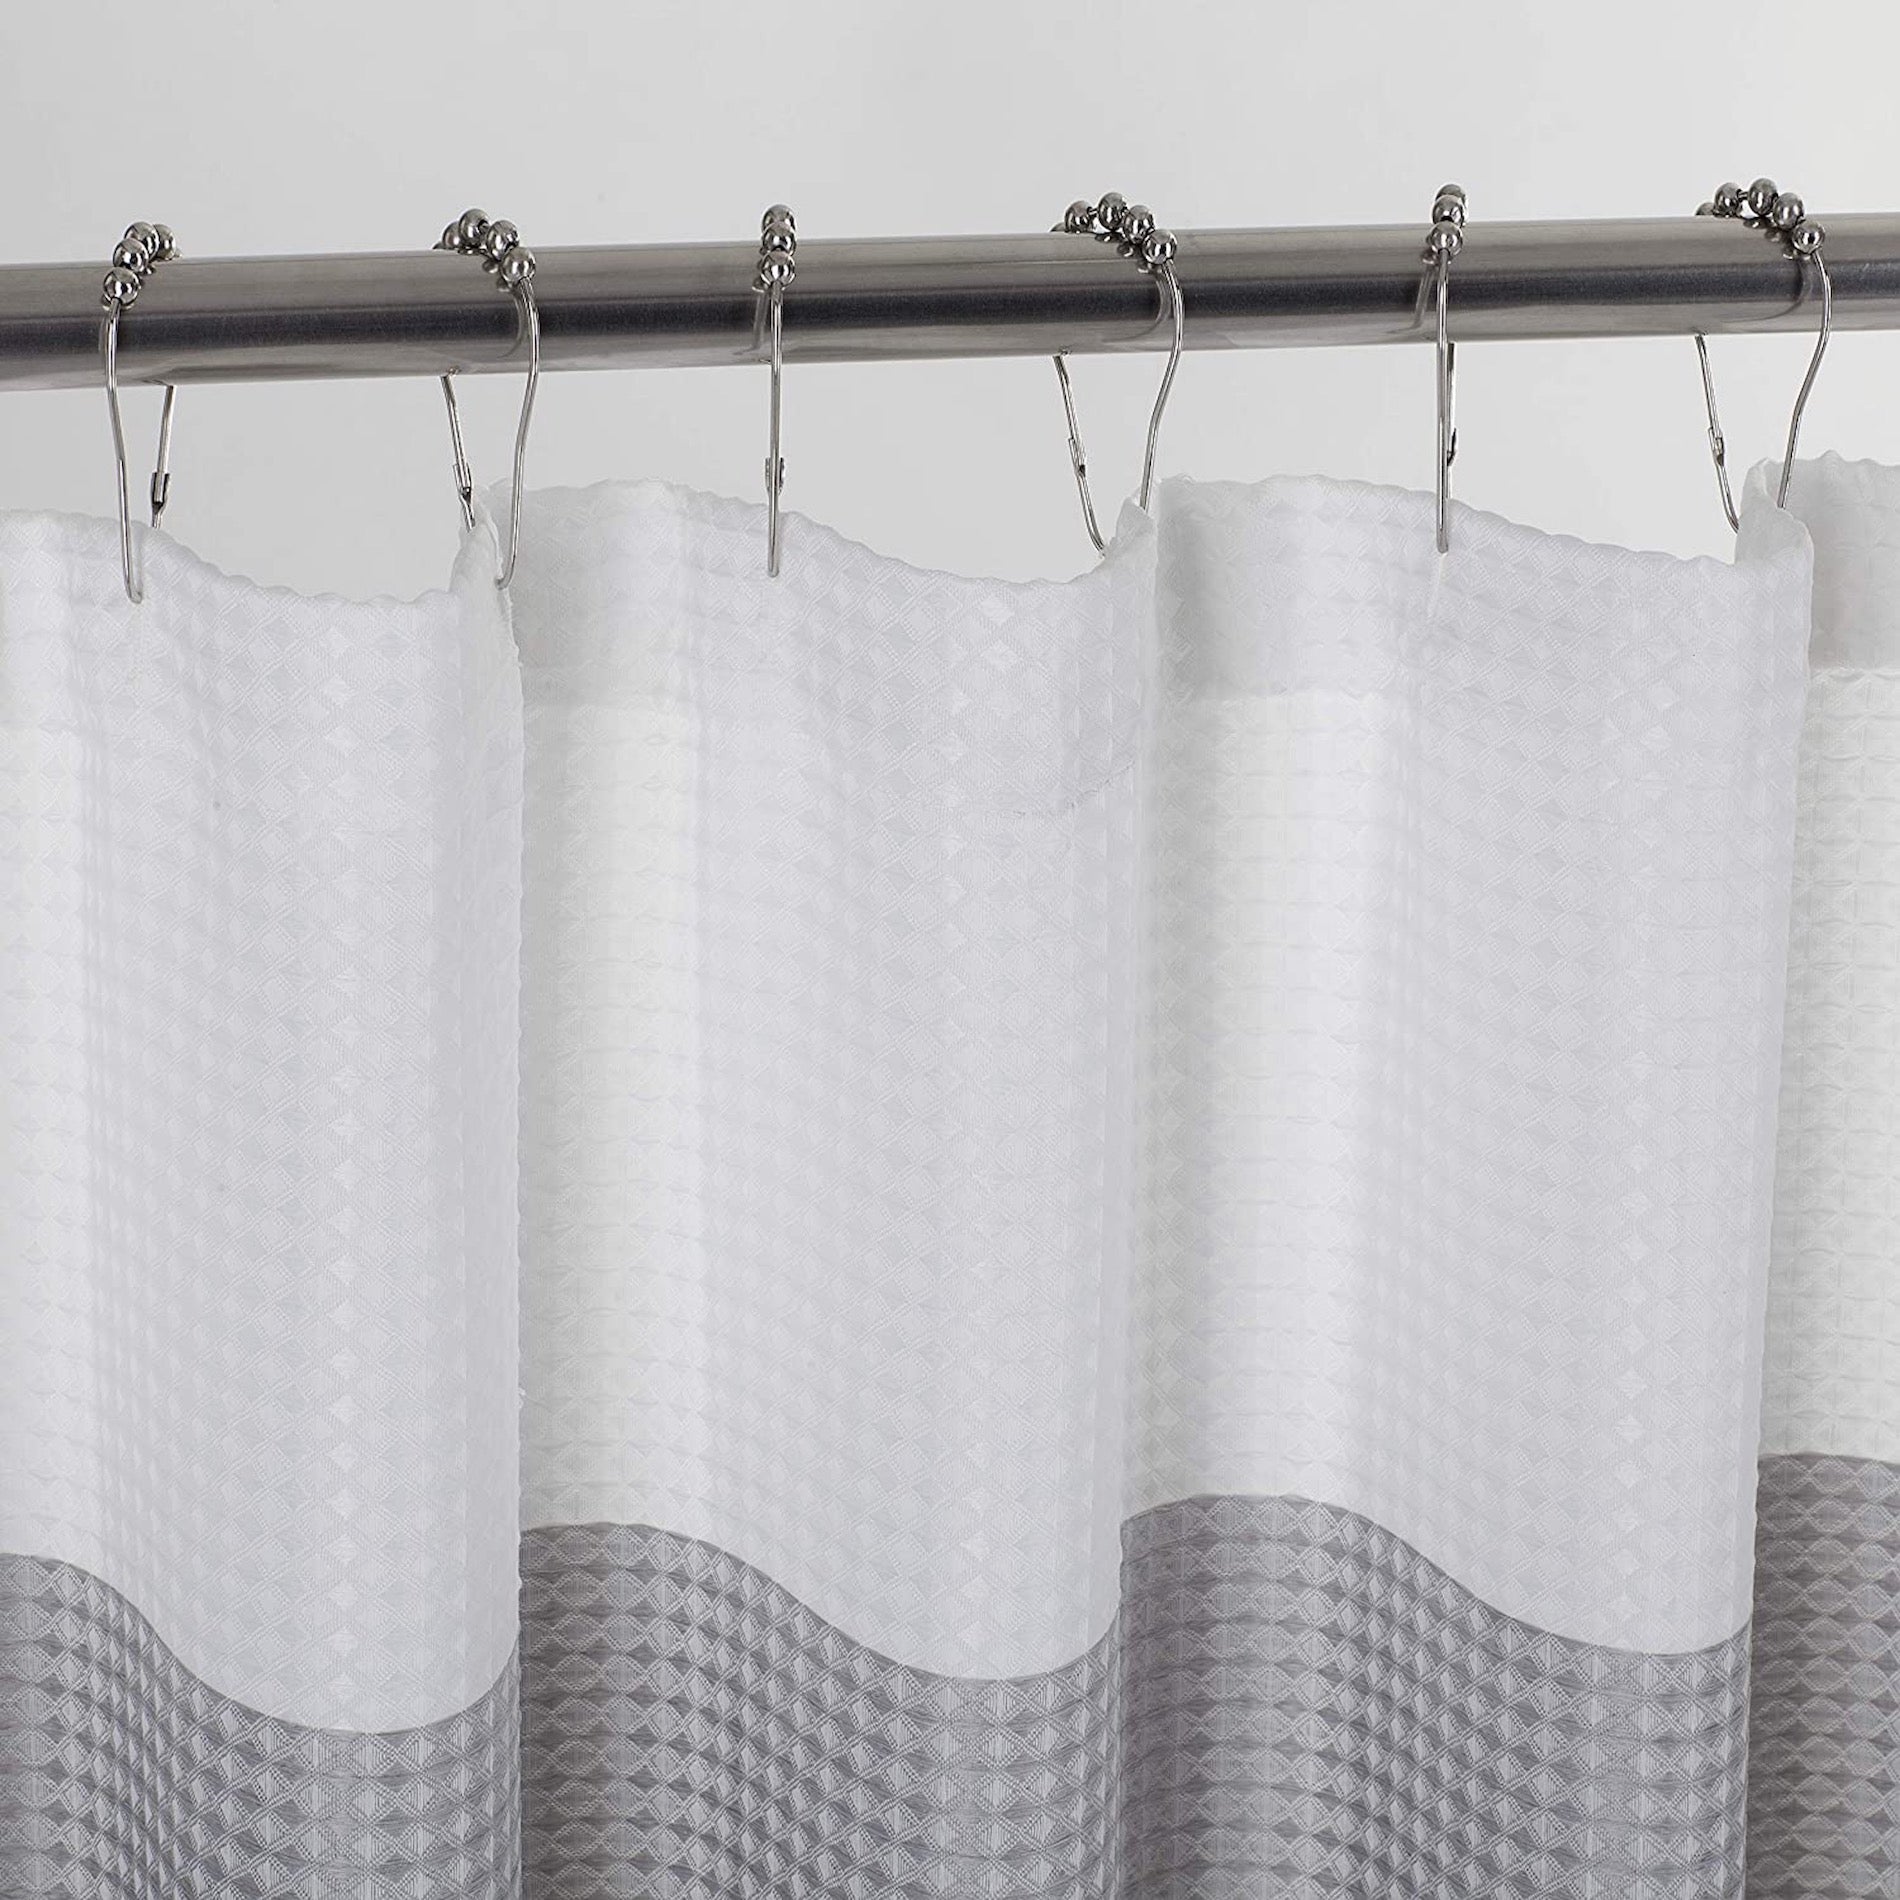 Dainty Home Ombre Waffle 3D Striped Waffle Weave Textured Ombre Stripe Designed Fabric Shower Curtain